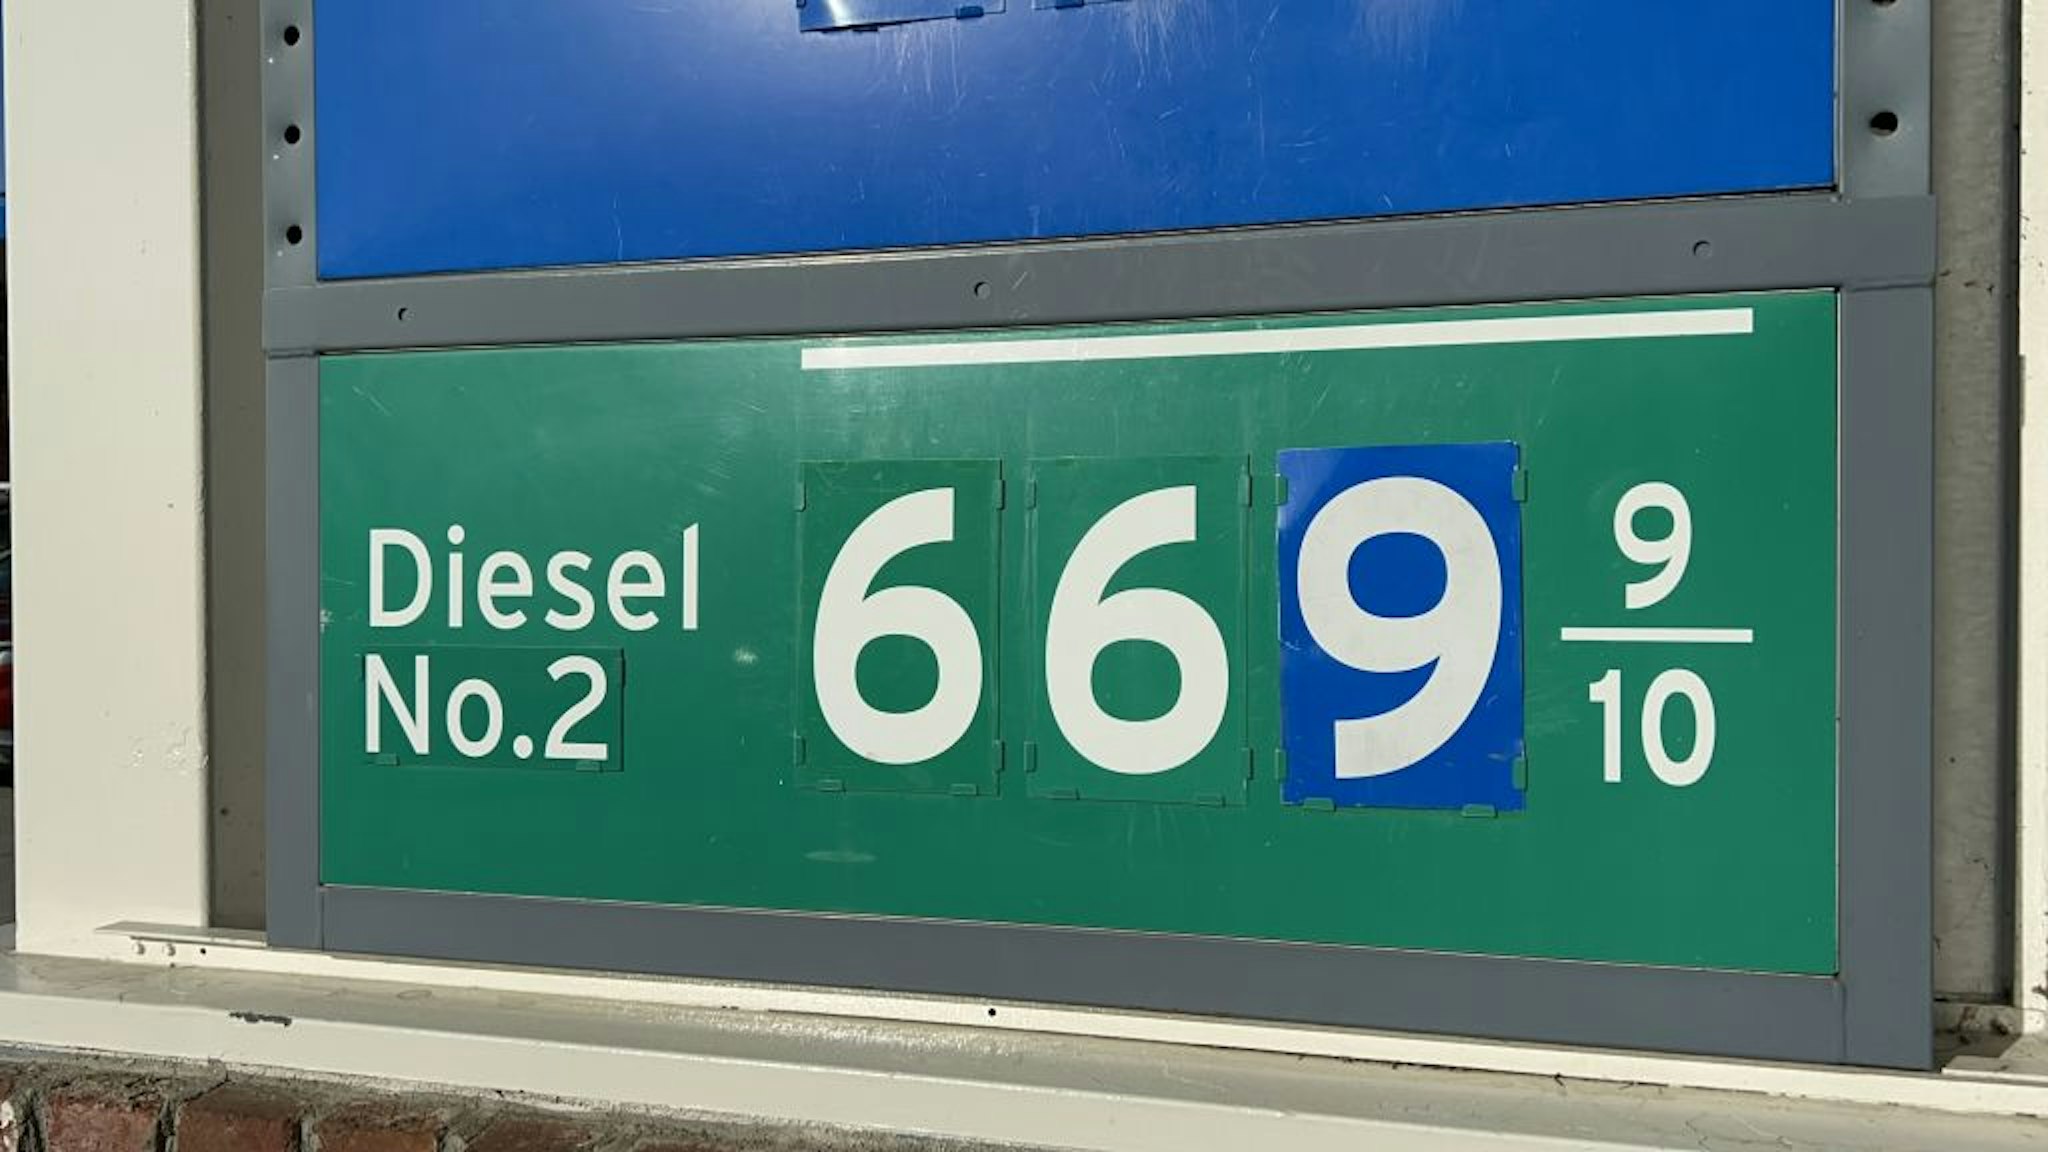 Chevron gas station with display showing diesel price, Lafayette, California, March 23, 2022. Photo courtesy Sftm. (Photo by Gado/Getty Images)